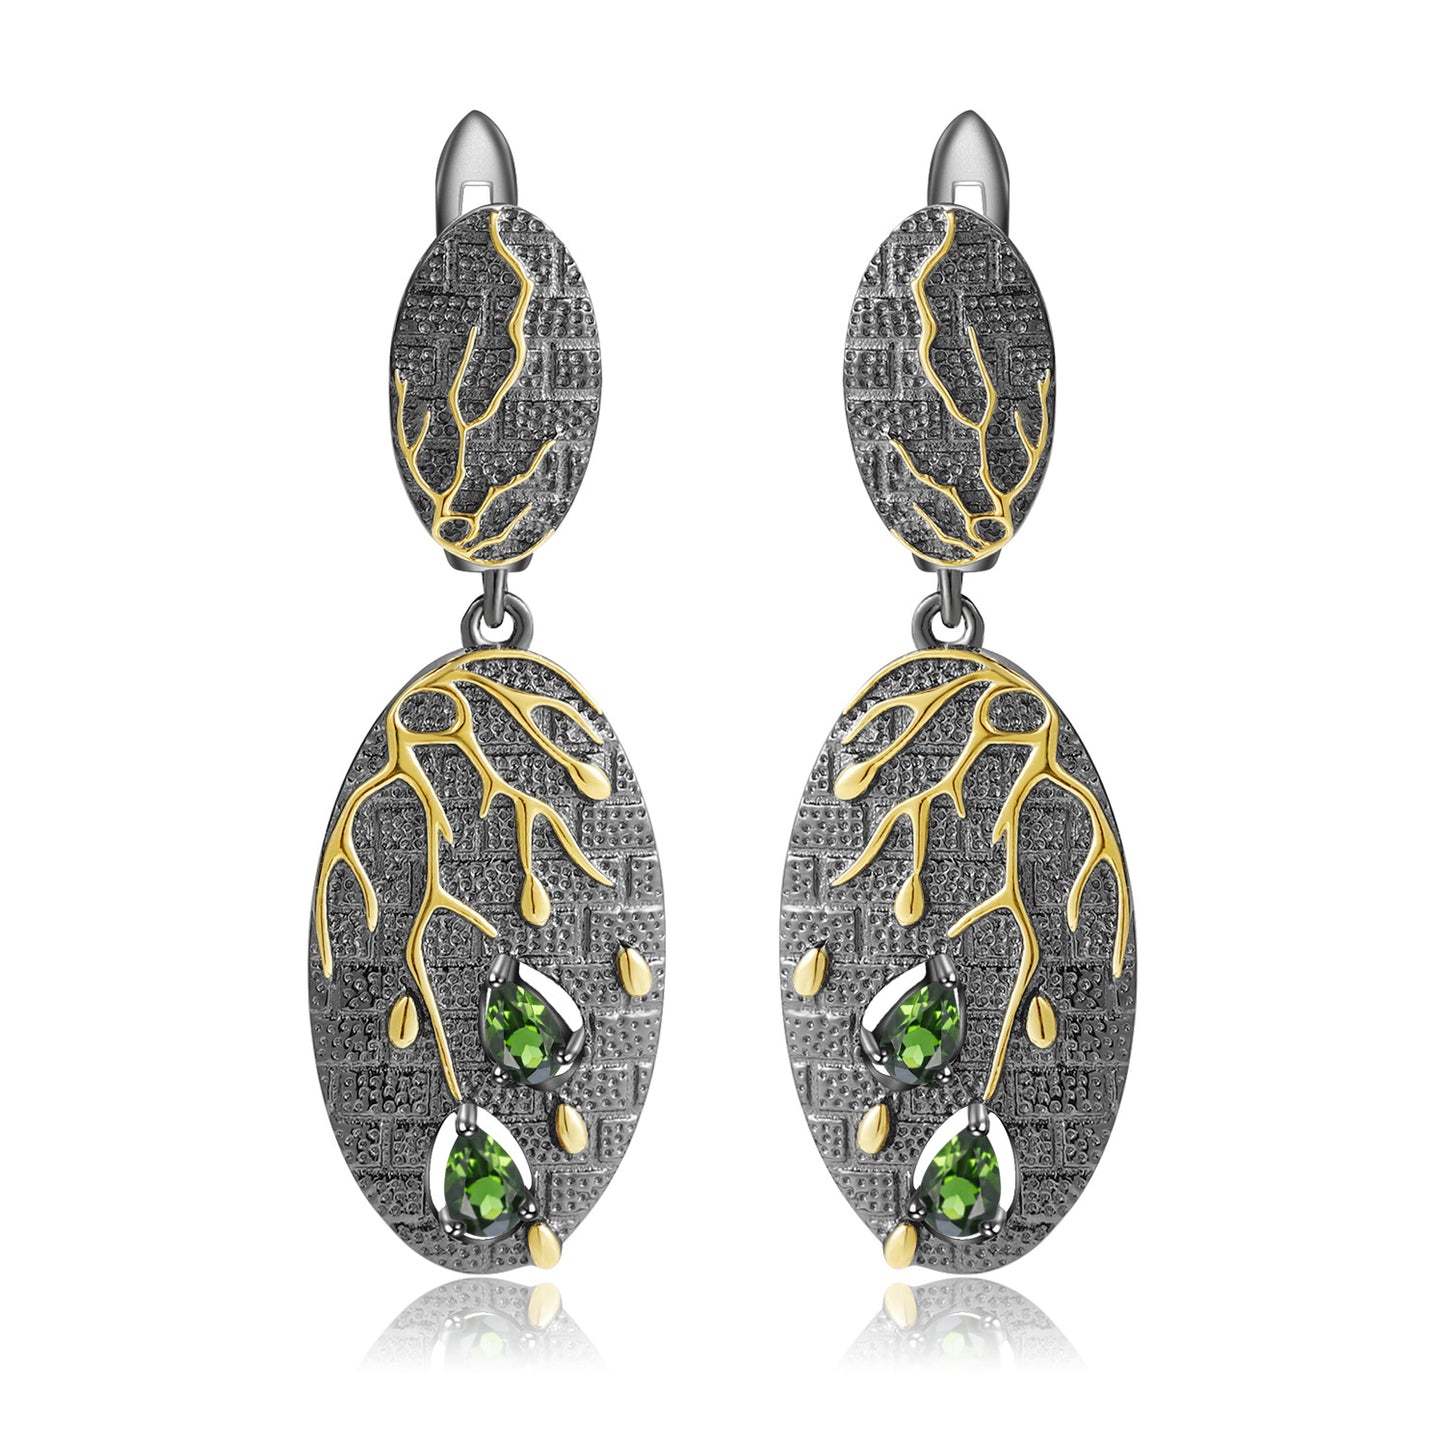 Georgia Premium Style Inlaid Natural Colourful Gemstones Fallen Leaves Oval Shape Sterling Silver Drop Earrings for Women